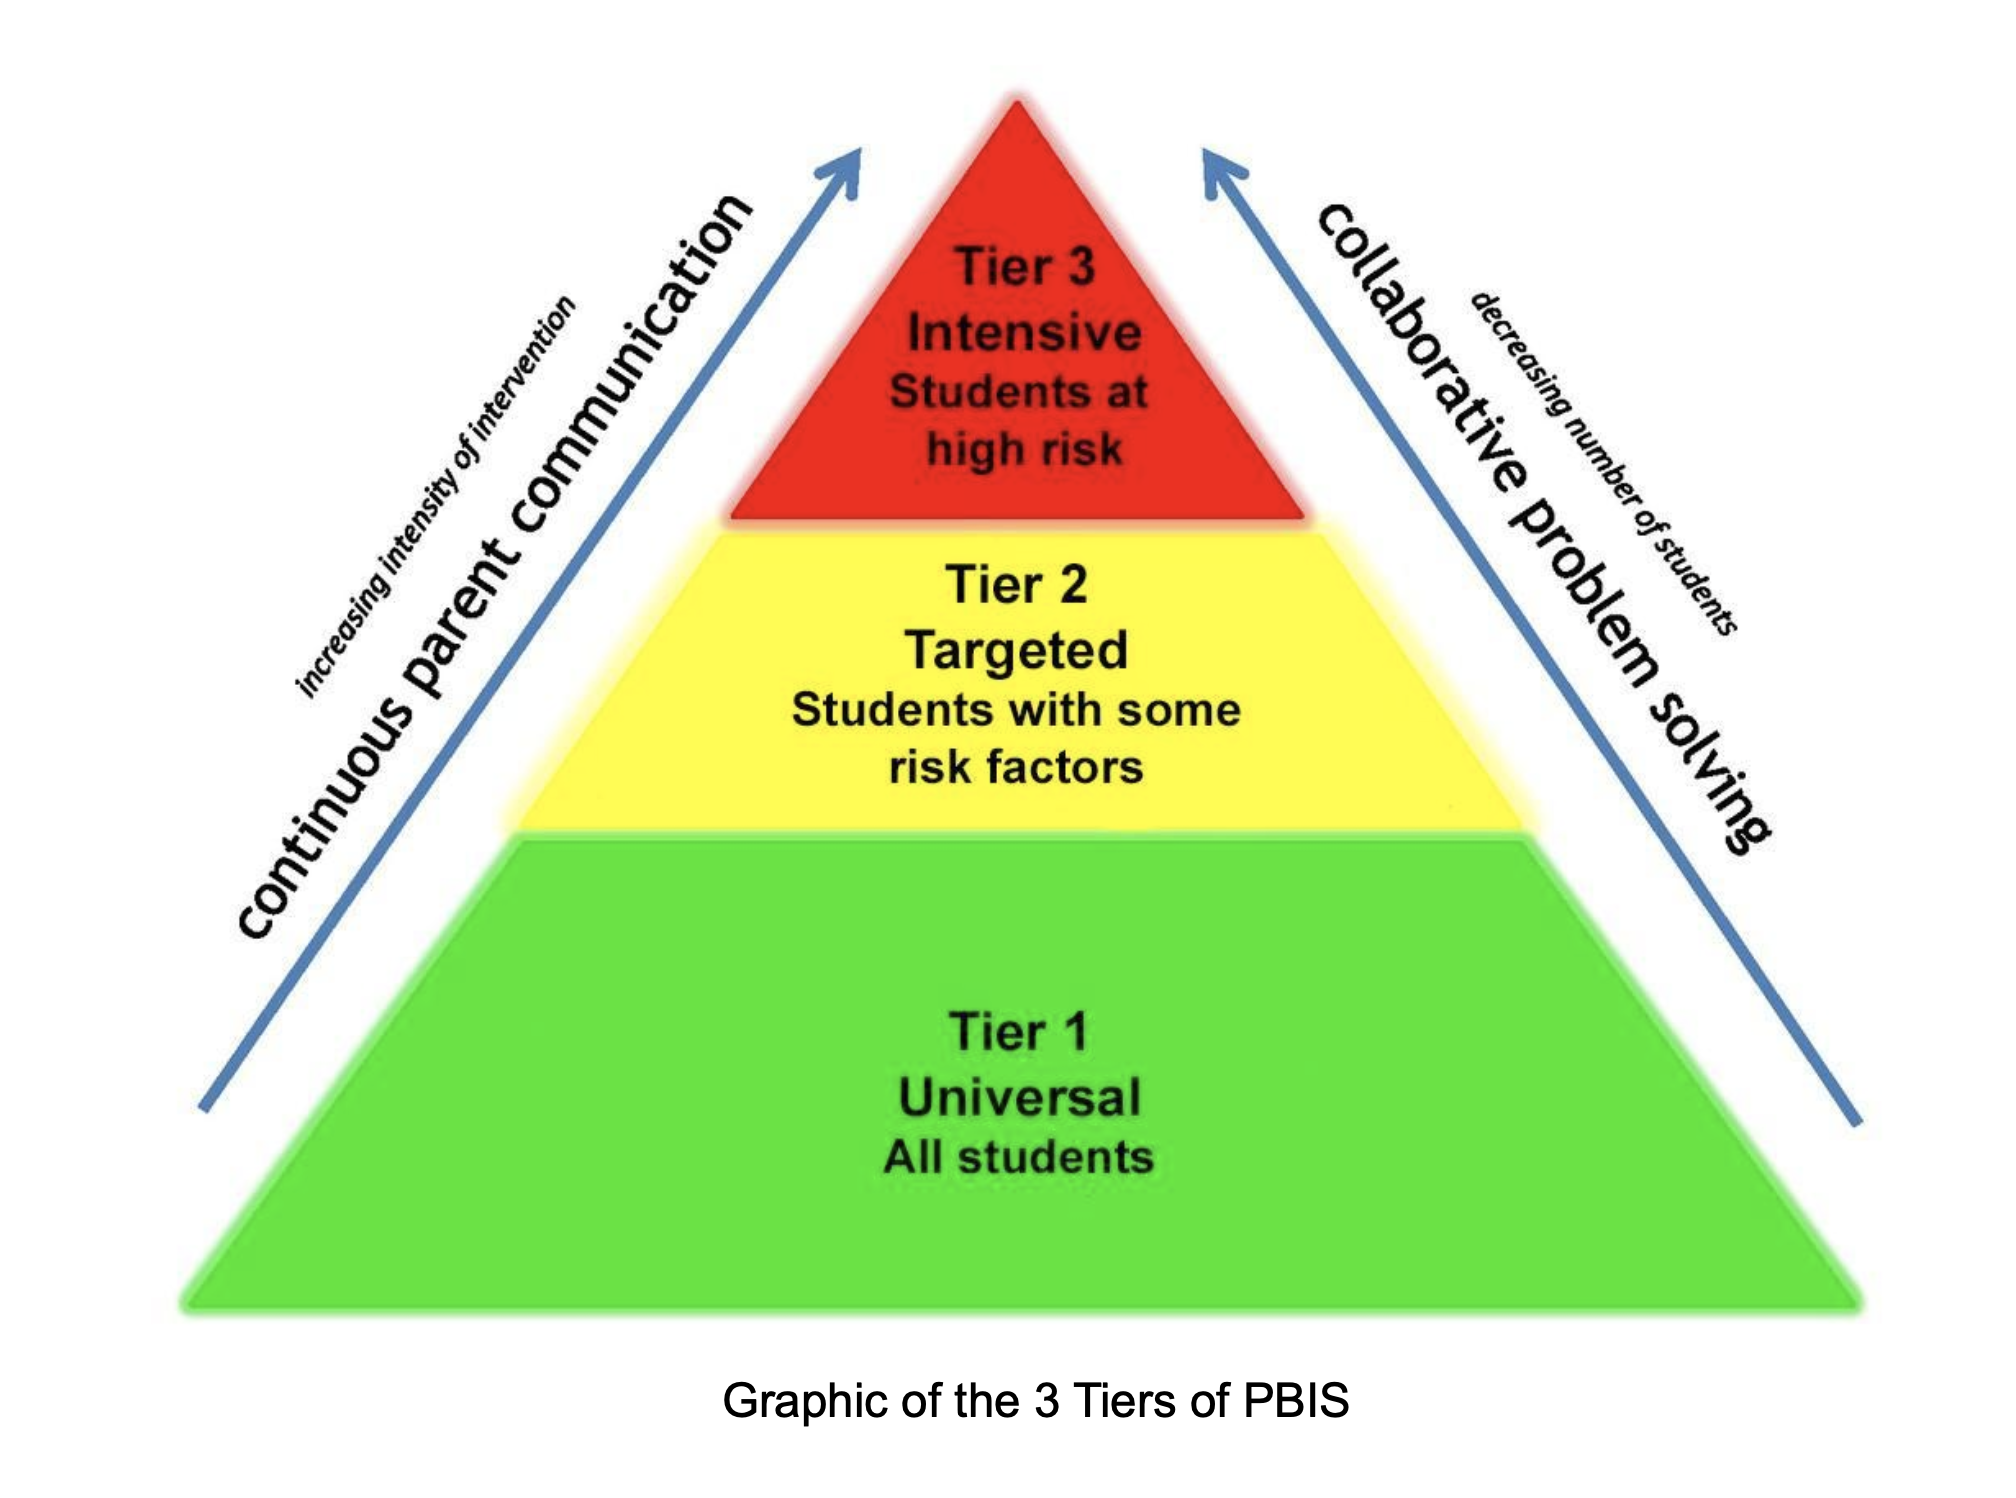 ID: A pyramid made of 3 different colors. The bottom is green with the text, Tier 1- Universal All Students. The middle is yellow with the text, Tier 2- Target Students with Some Risk Factors. The top is red with the text, Tier 3- Intensive Students at High Risk. There are 2 arrows pointing up on both sides of the Pyramid. The text on the left, Increasing Intensity of Intervention/ Continuous Parent Communication and the right, Decreasing Number of Students/ Collaborative Problem Solving.